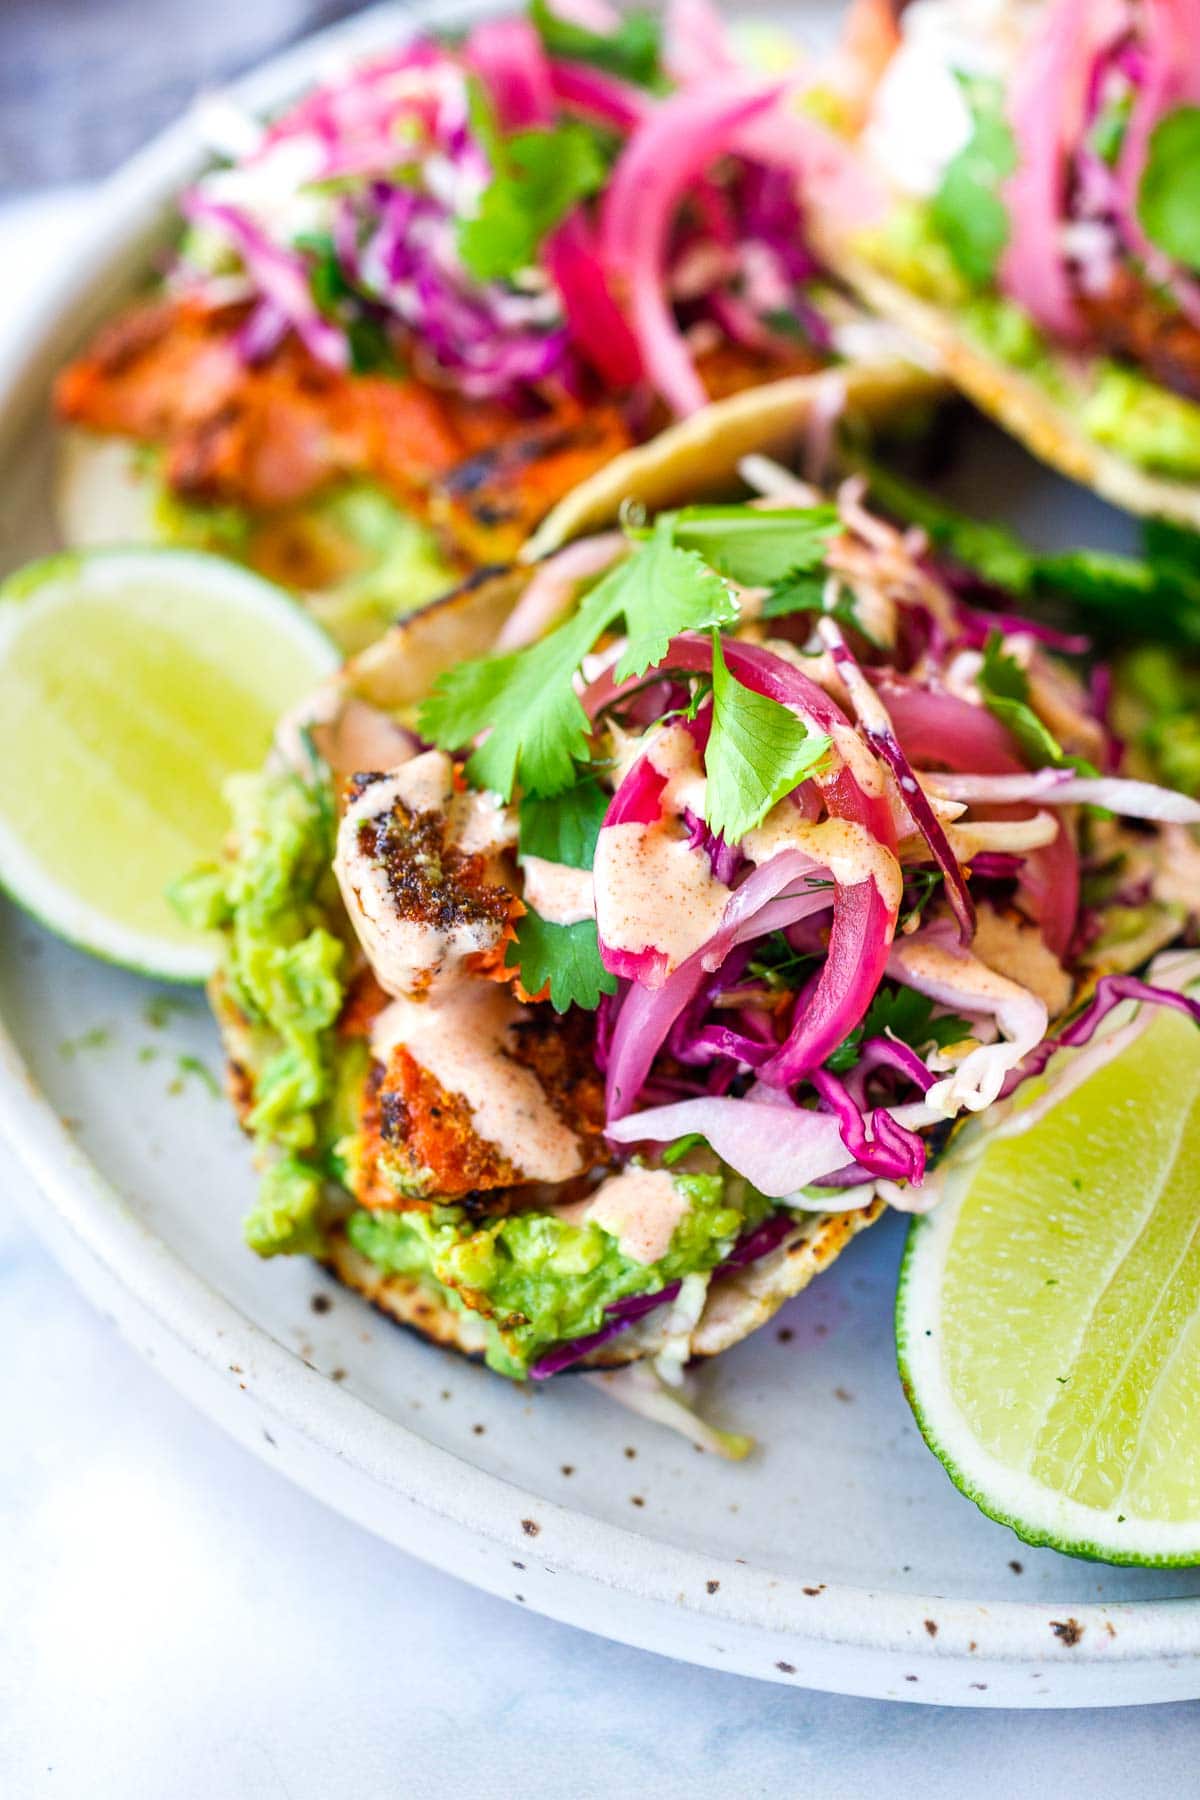 Salmon tacos loaded up with avocado, pickled onions, cilantro, taco slaw and creamy taco sauce.